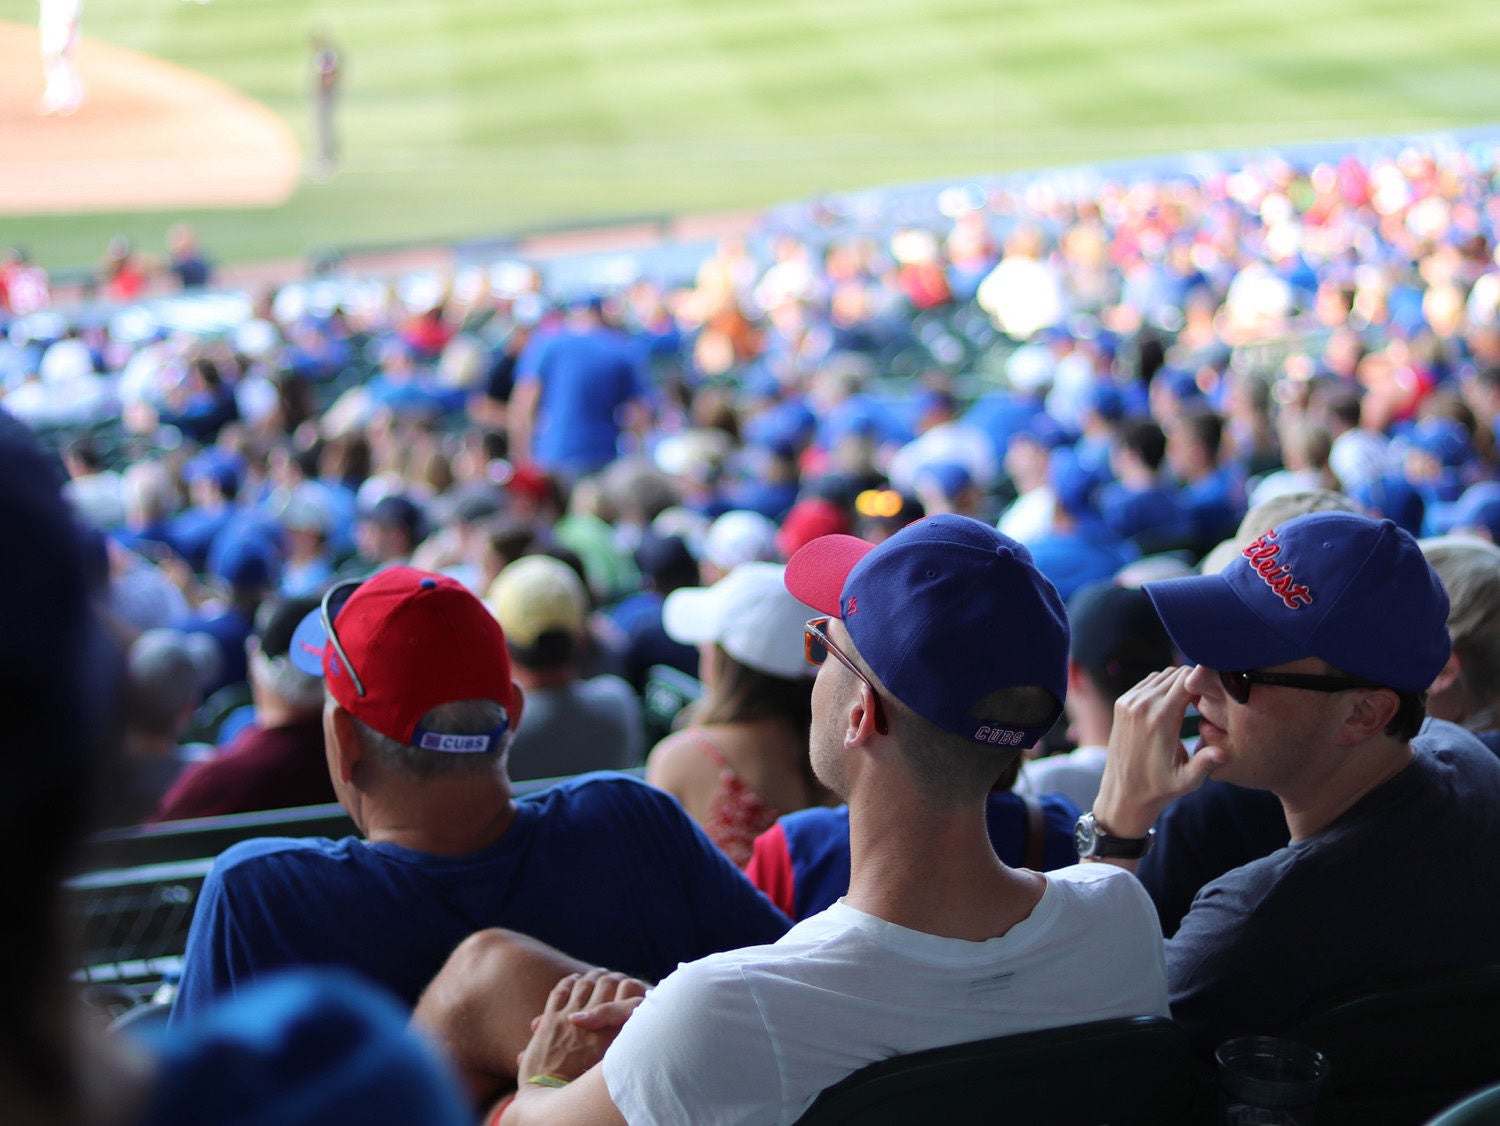 Fans watching a Chicago Cubs baseball game.